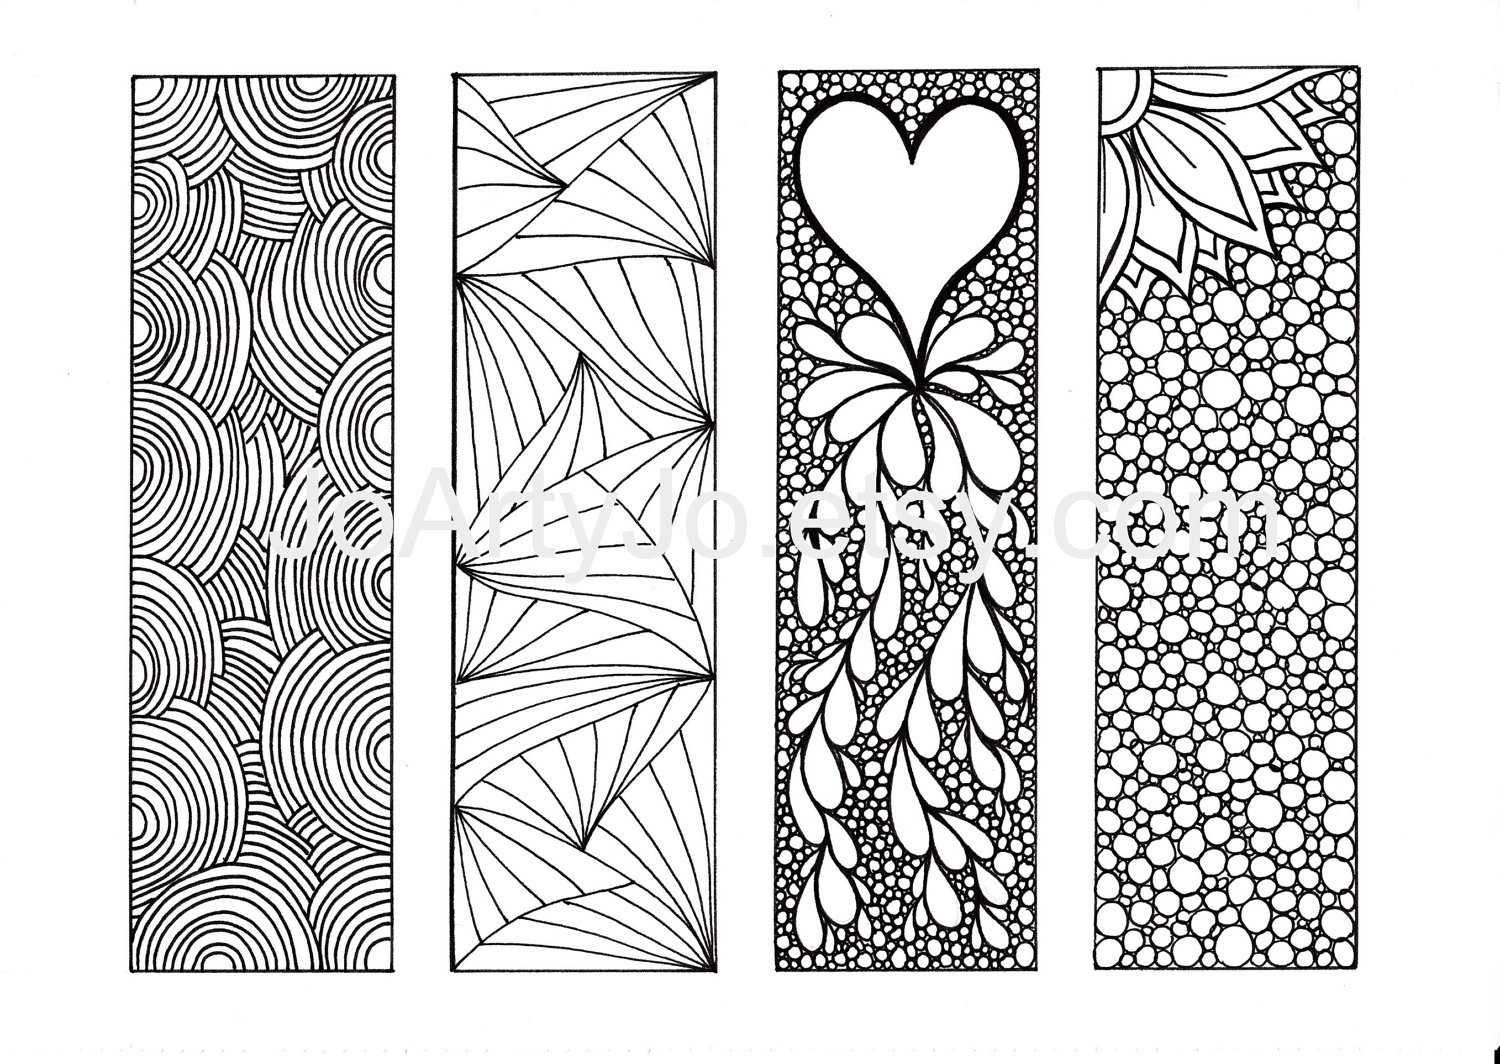 Coloring Pages : Coloring Pages Free Bookmarks To Color For In Free Blank Bookmark Templates To Print